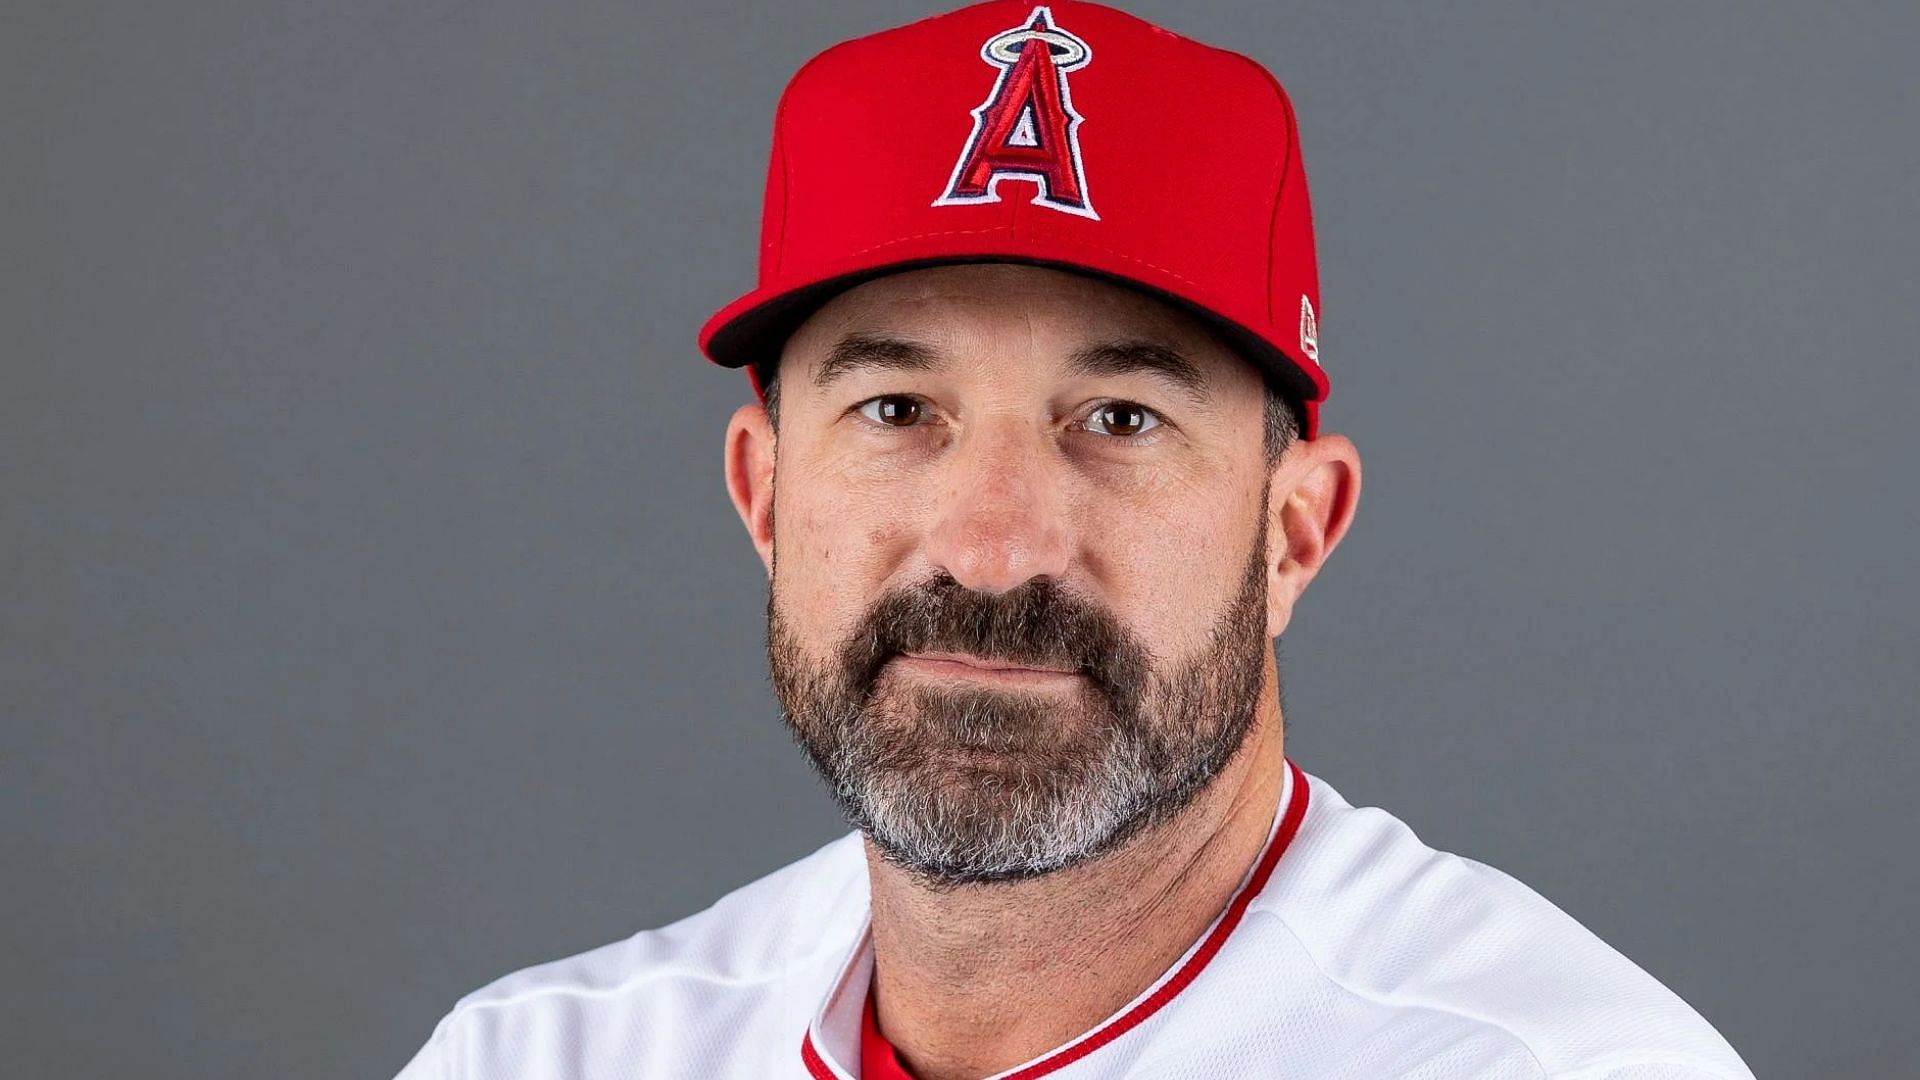 Los Angeles Angels Photo Day: TEMPE, ARIZONA - FEBRUARY 18: Pitching coach Mickey Callaway #75 of the Los Angeles Angels poses for a photo during Photo Day at Tempe Diablo Stadium on February 18, 2020 in Tempe, Arizona. (Photo by Jennifer Stewart/Getty Images)